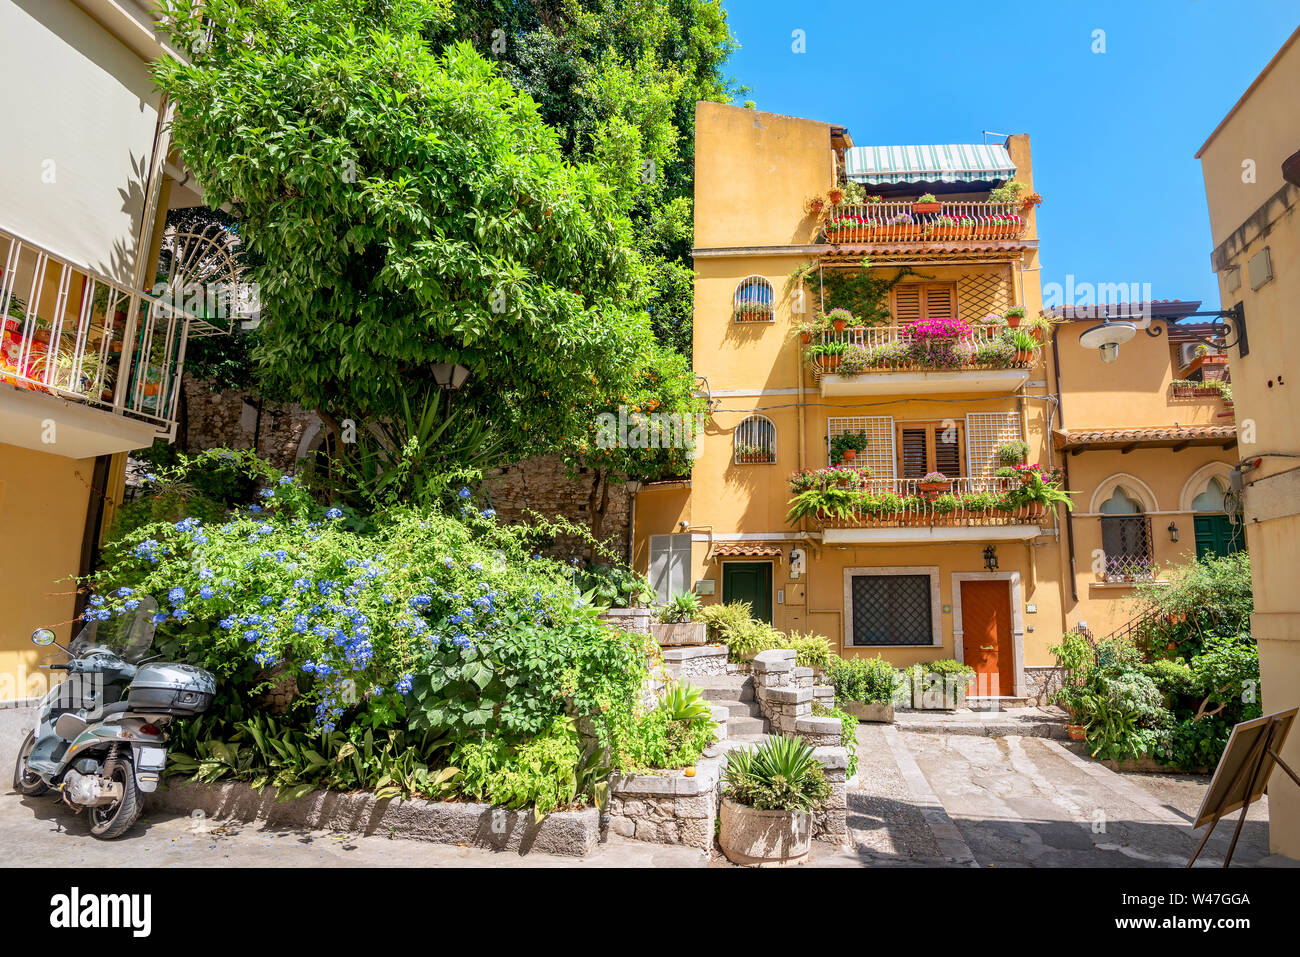 Street photo with colorful facades of houses in resort town Taormina. Sicily, Italy Stock Photo